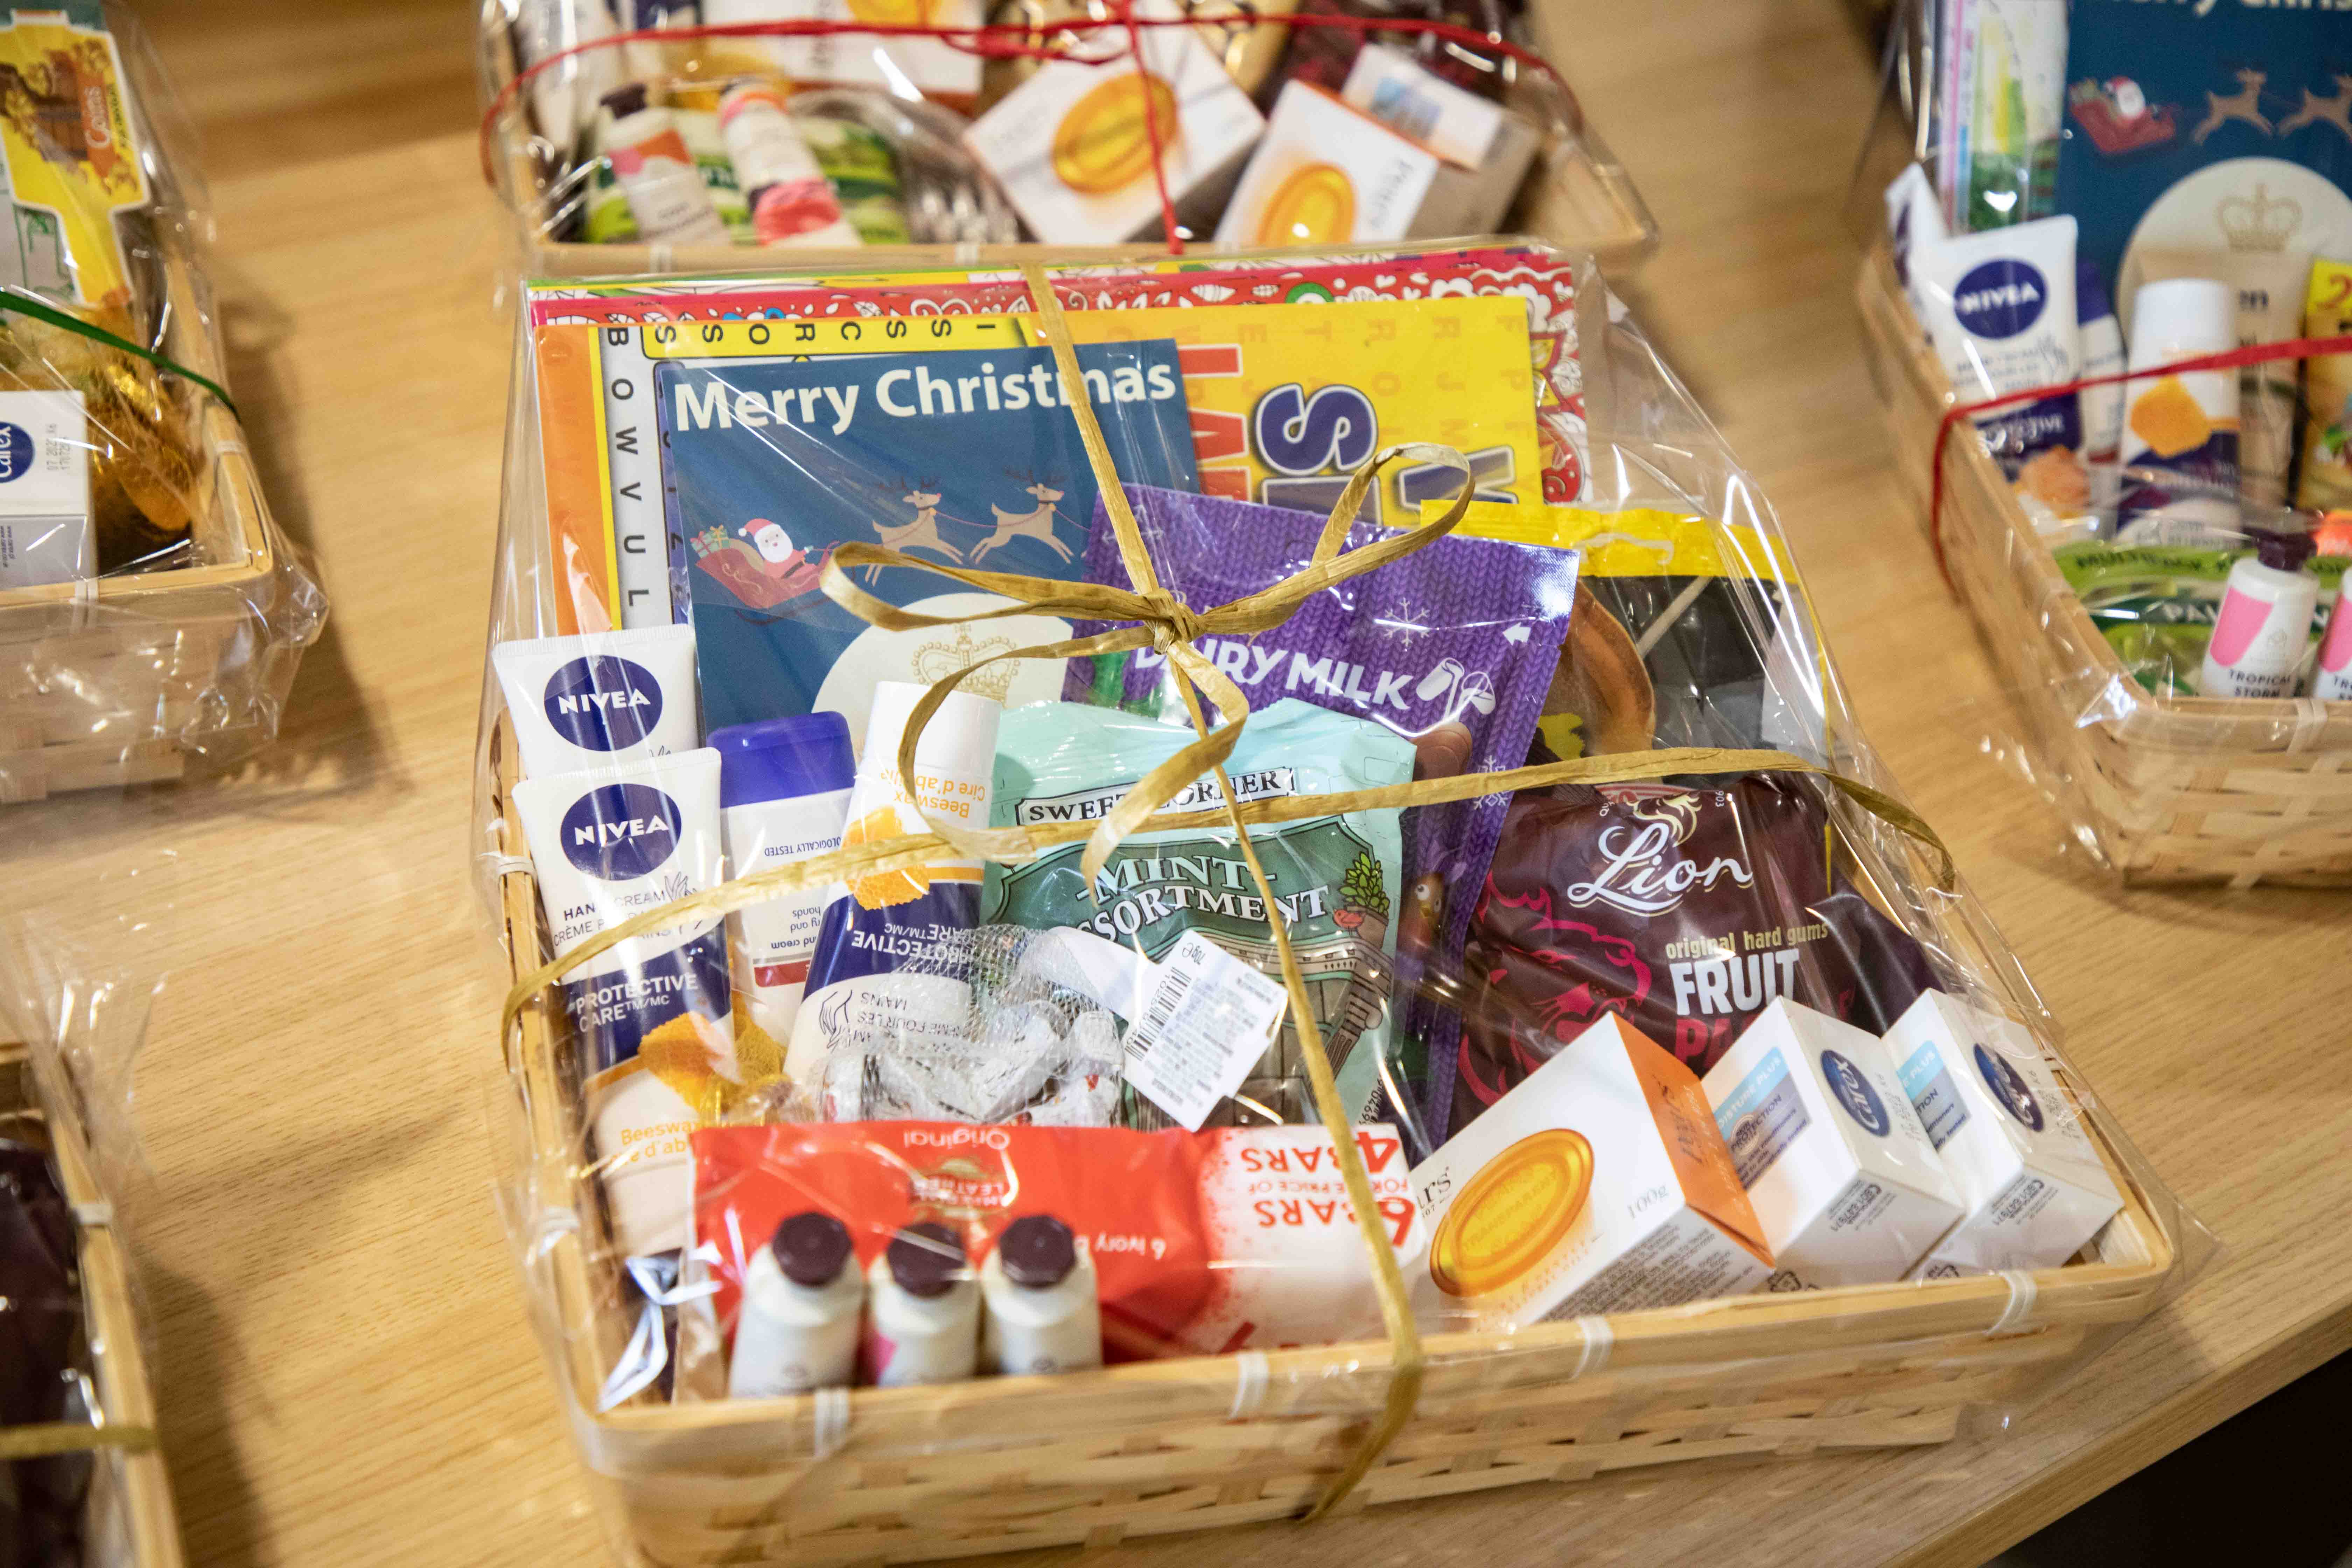 One of the hampers